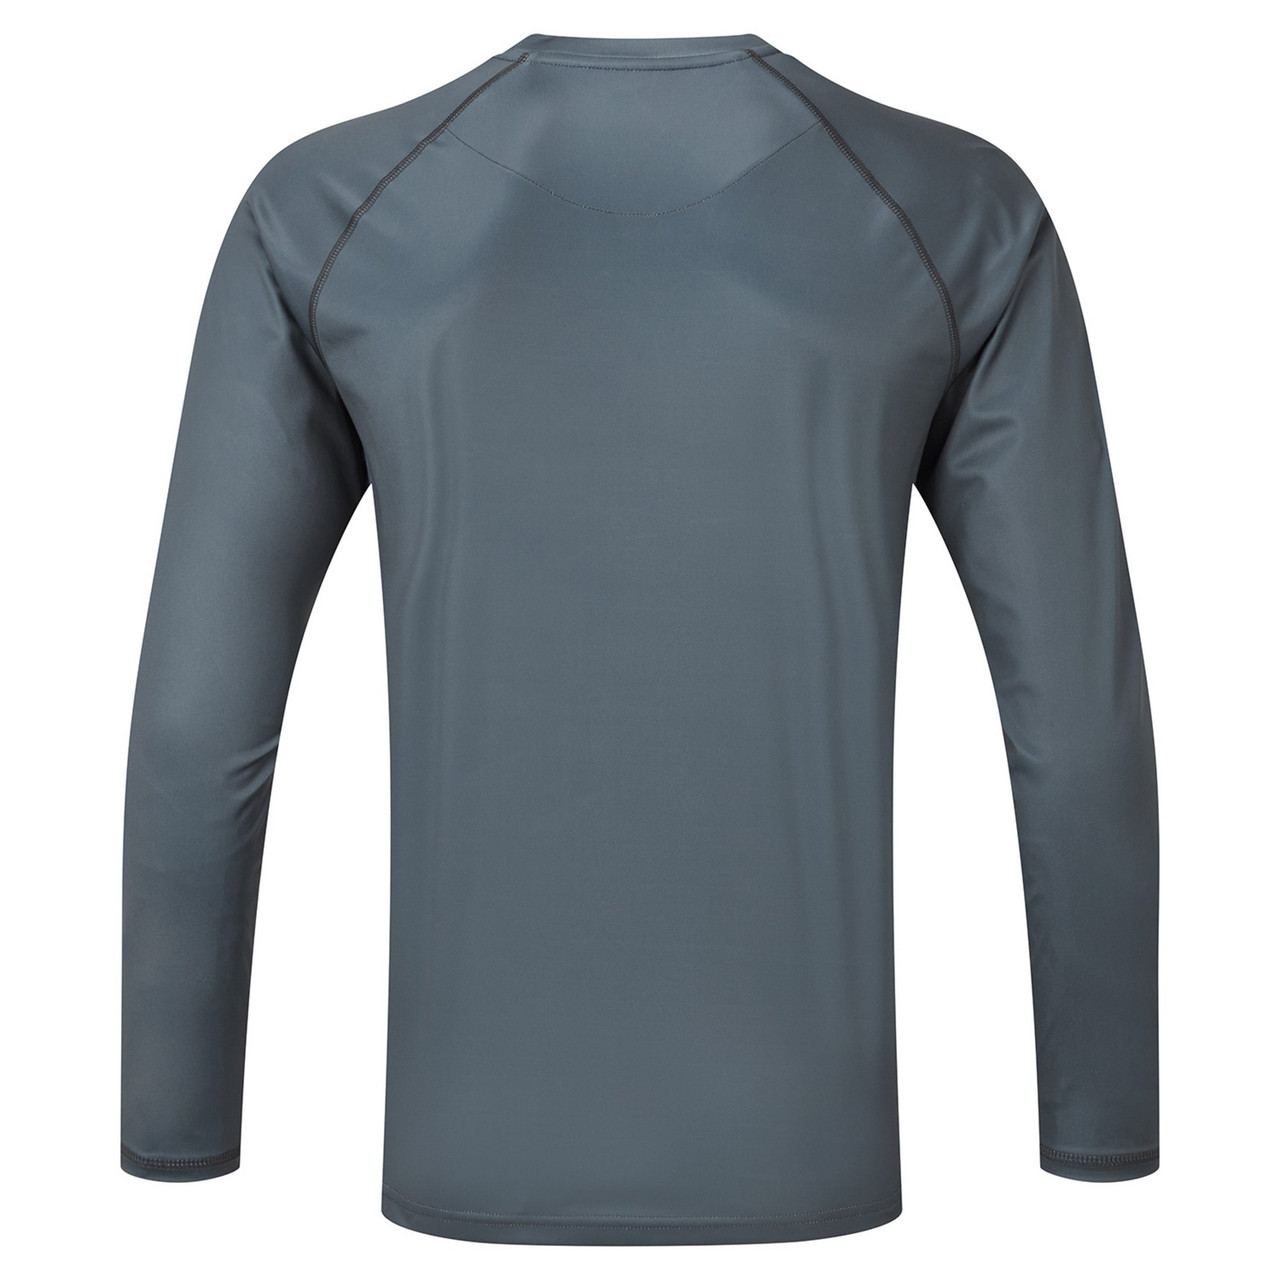 XPEL® Tec Long Sleeve Top in Pewter - Gill Fishing